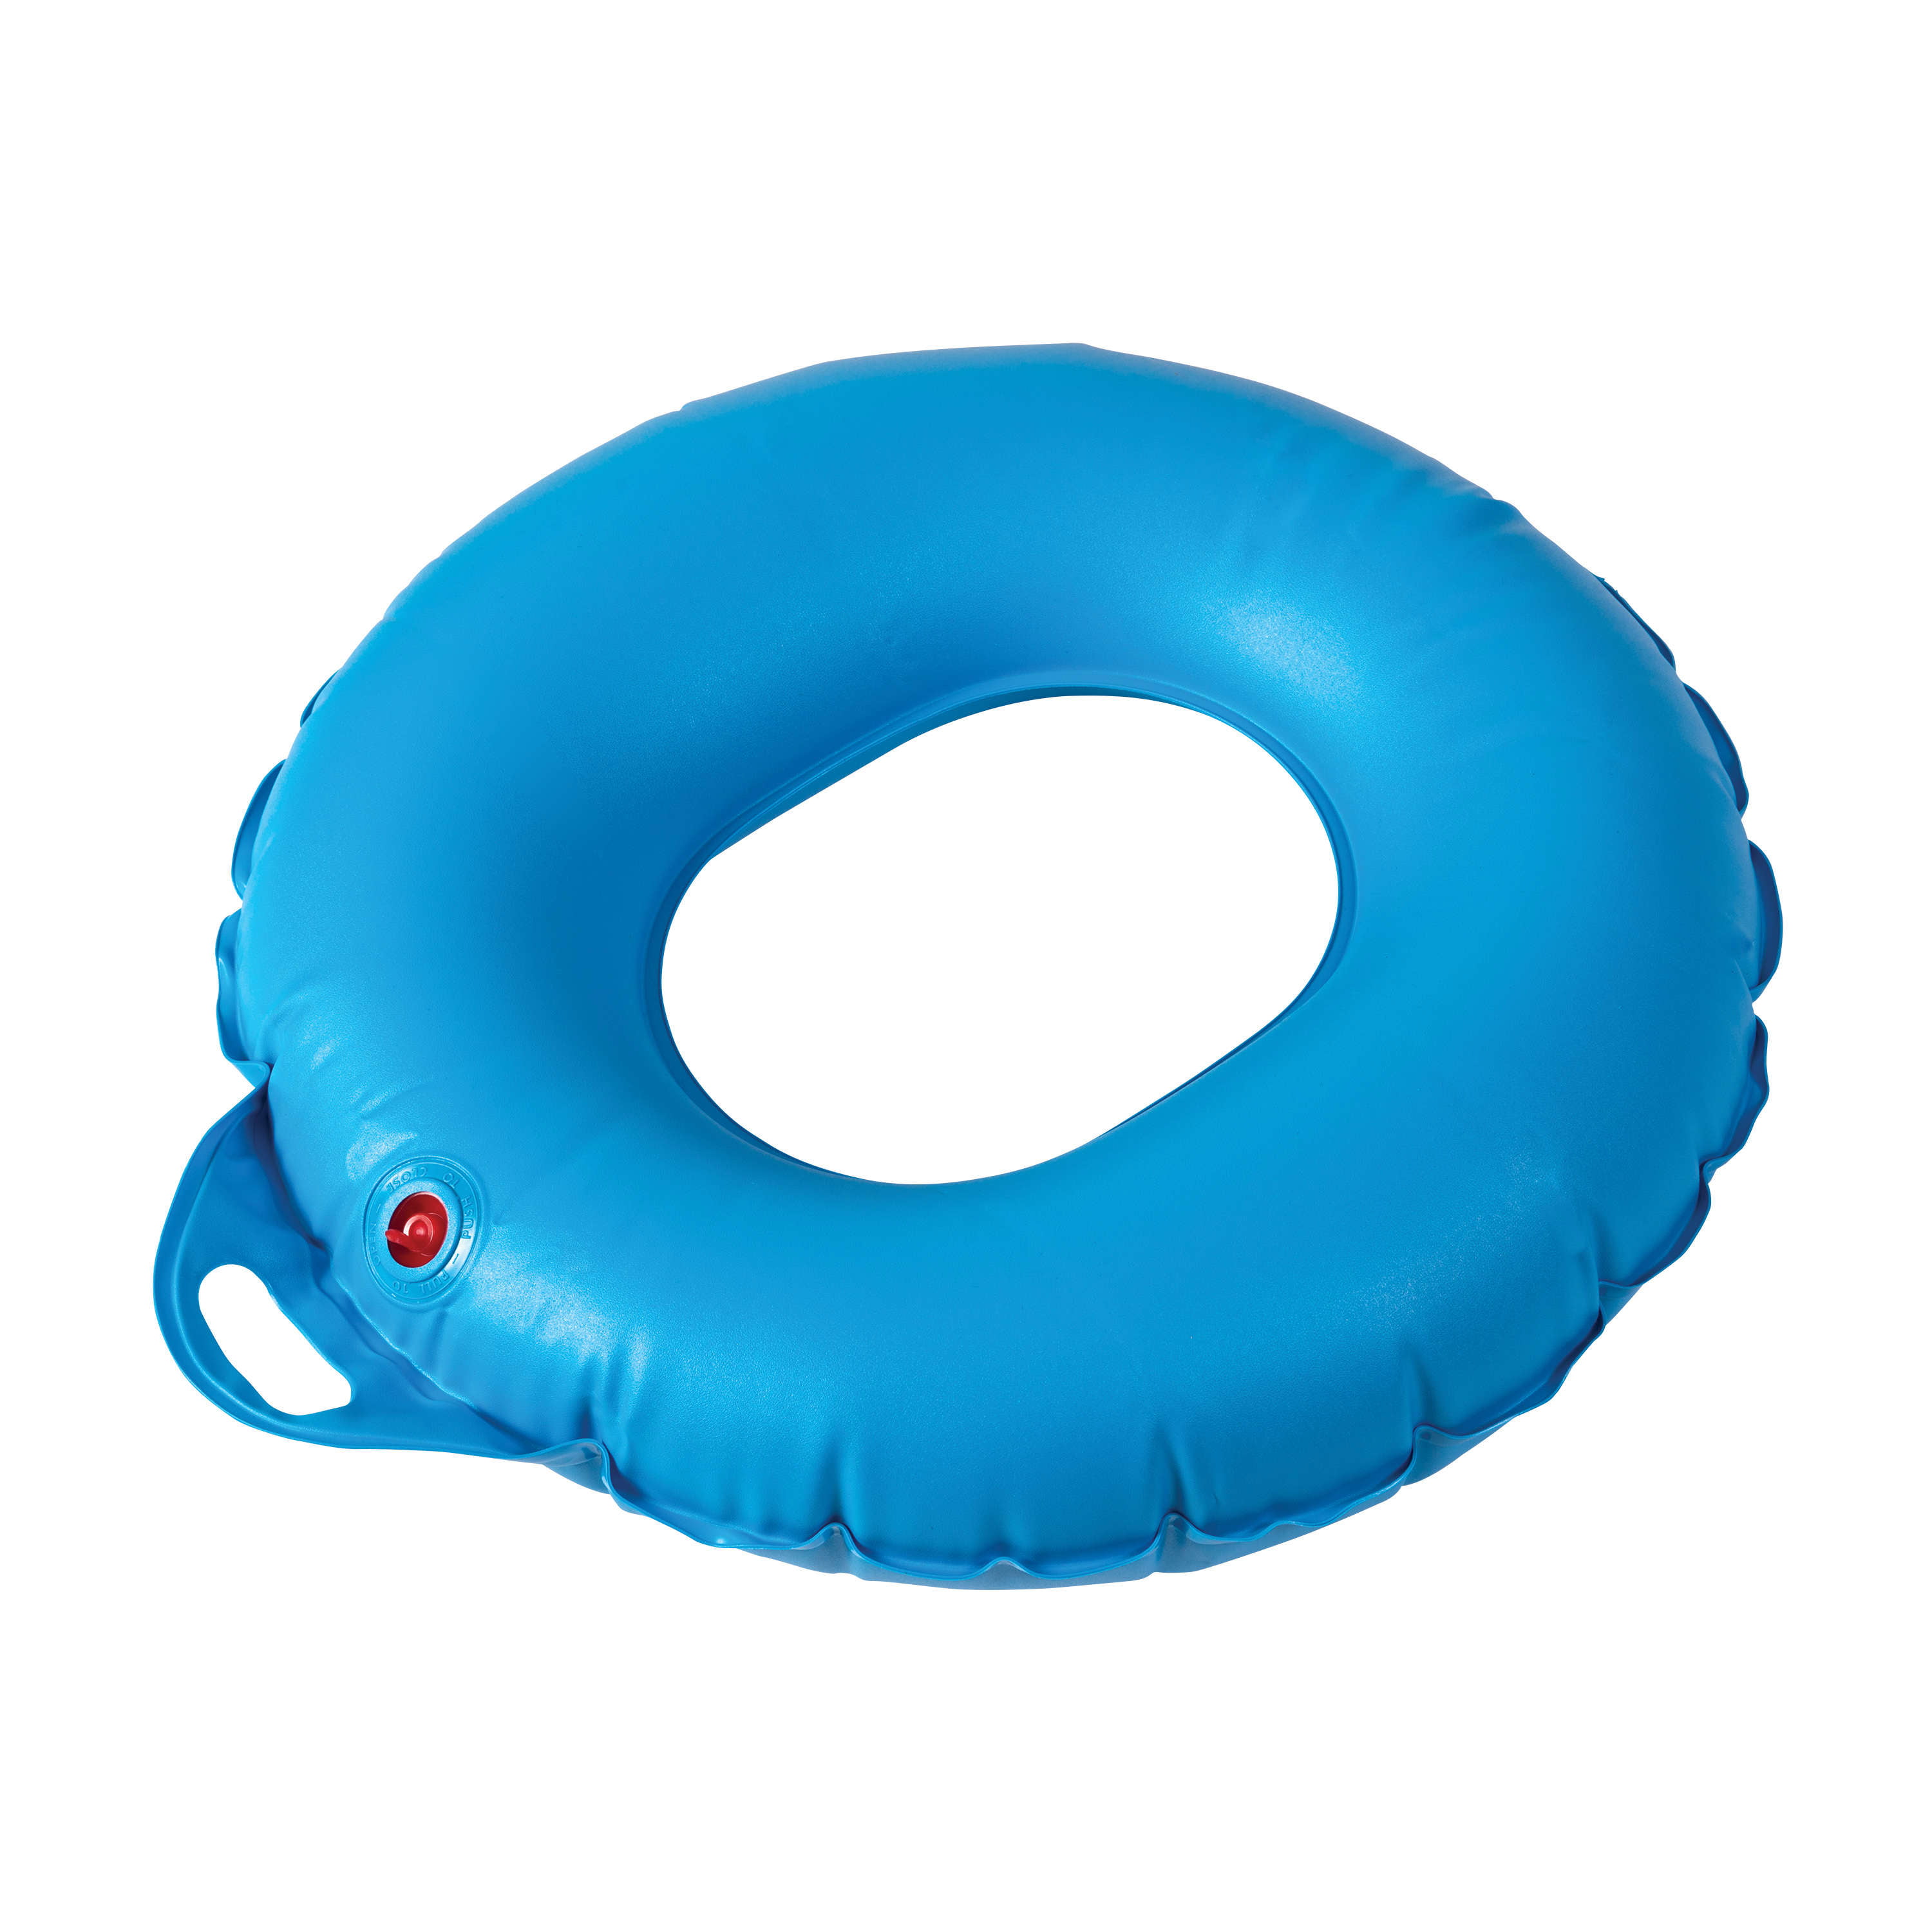 DMI Donut Inflatable Seat Cushion for 